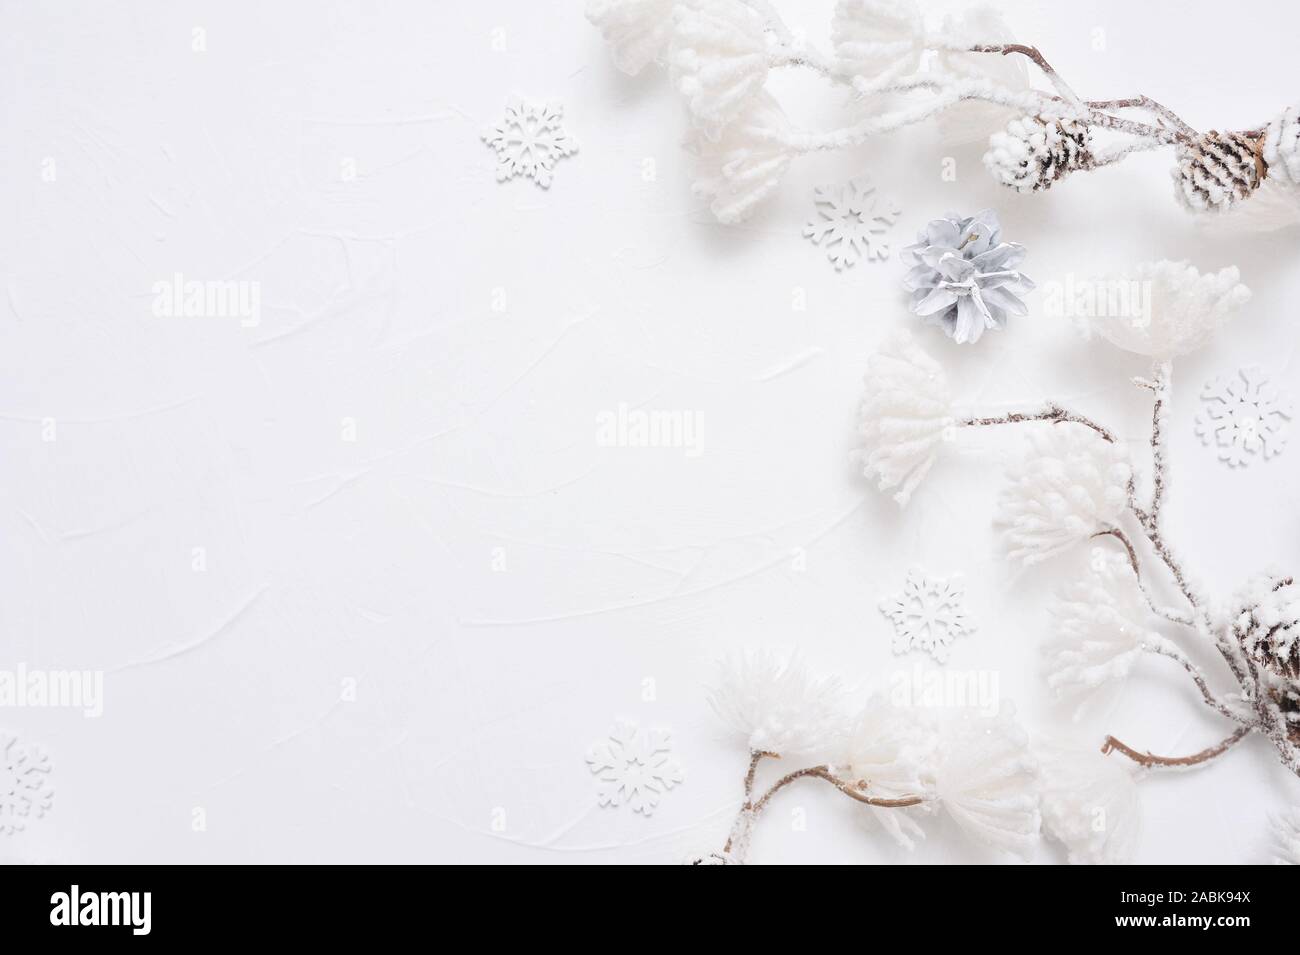 White Christmas border with cones, snowflakes and snown flowers. Xmas Wreath decoration with place for your text Stock Photo